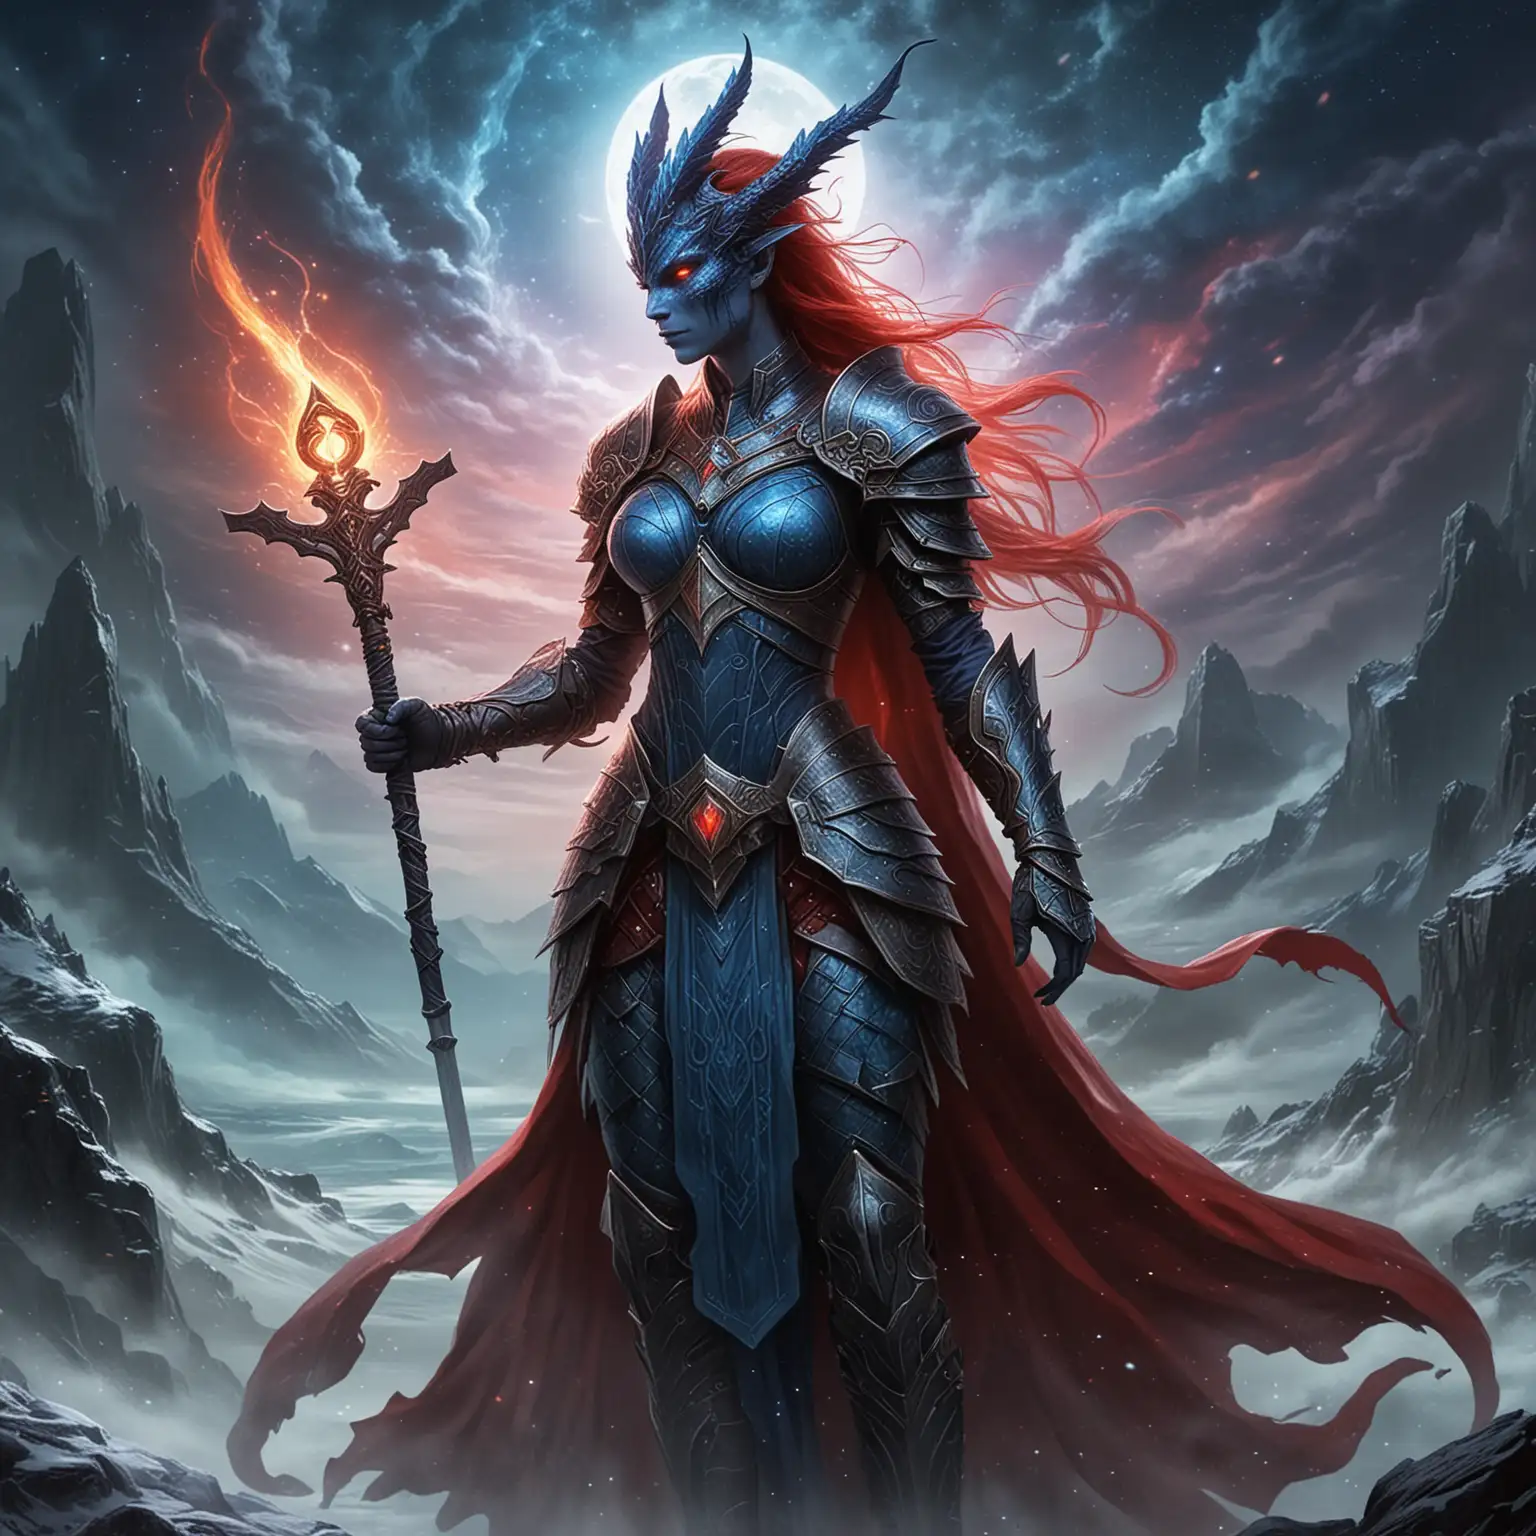 In a realm where the night sky is perpetually awash with the dance of blue and red auroras, a mysterious figure emerges as the guardian of the arcane. Clad in armor adorned with esoteric runes, the guardian wields a staff crowned by the visage of a dragon, a symbol of their unyielding power. With hair as fluid as the rivers of time, they stand vigilant against the encroaching shadows, their face a secret hidden from the world. Who is this enigmatic protector, and what ancient secrets do they keep within the folds of their dark mantle?

